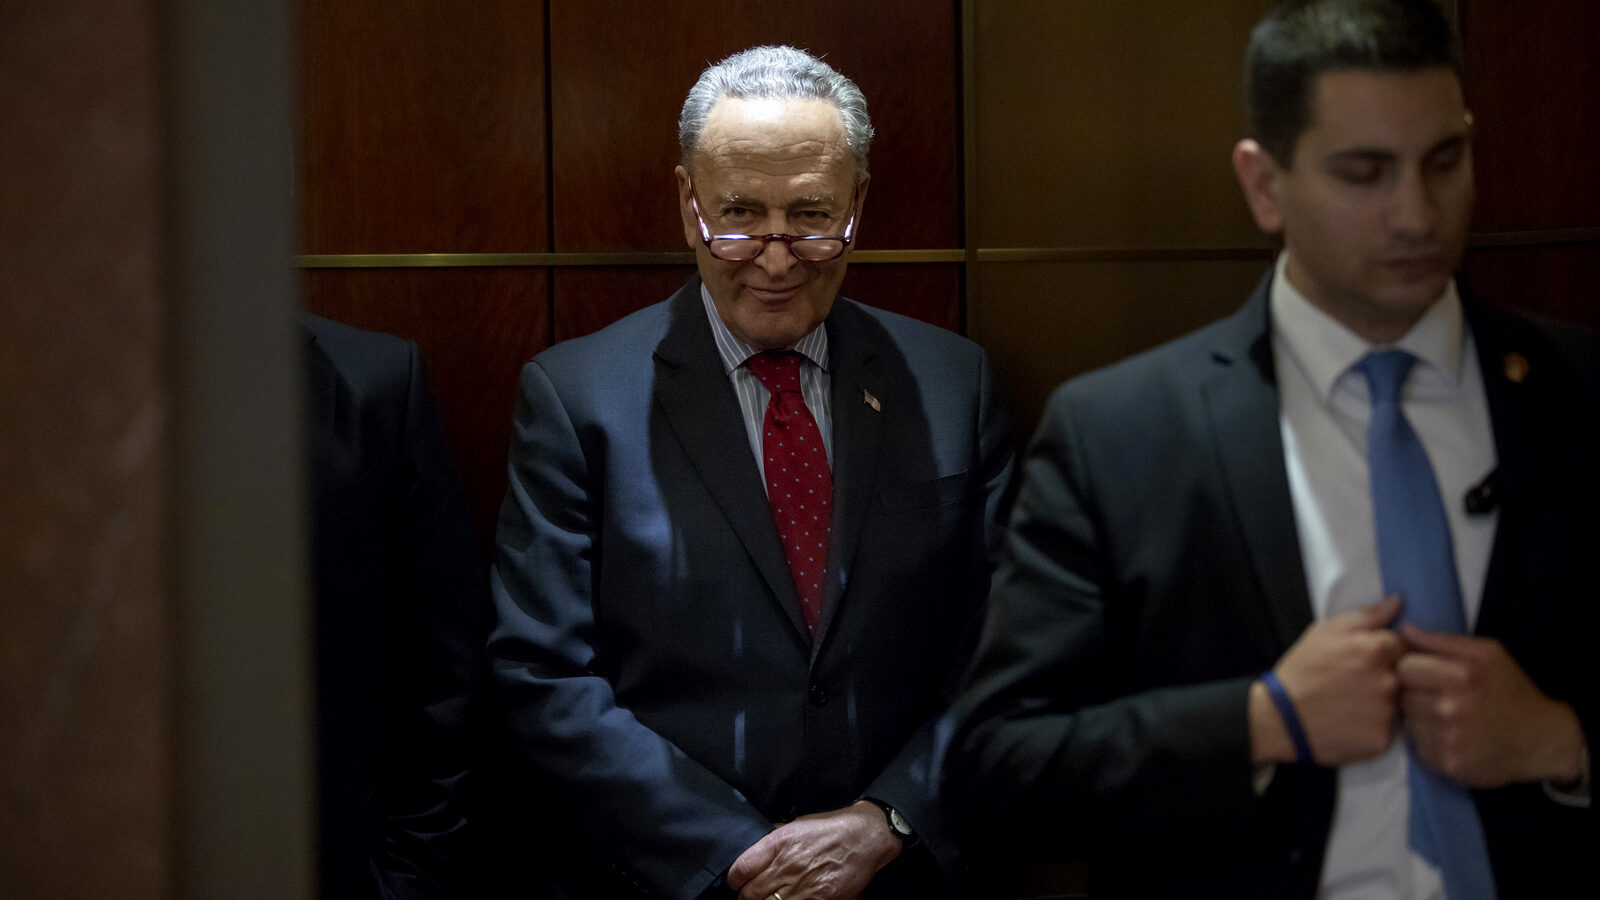 Senate Minority Leader Chuck Schumer, D-N.Y., arrives as House and Senate lawmakers from both parties gather for a classified briefing in a secure room about the federal investigation into President Donald Trump's 2016 campaign, on Capitol Hill in Washington, May 24, 2018. J. Scott Applewhite | AP